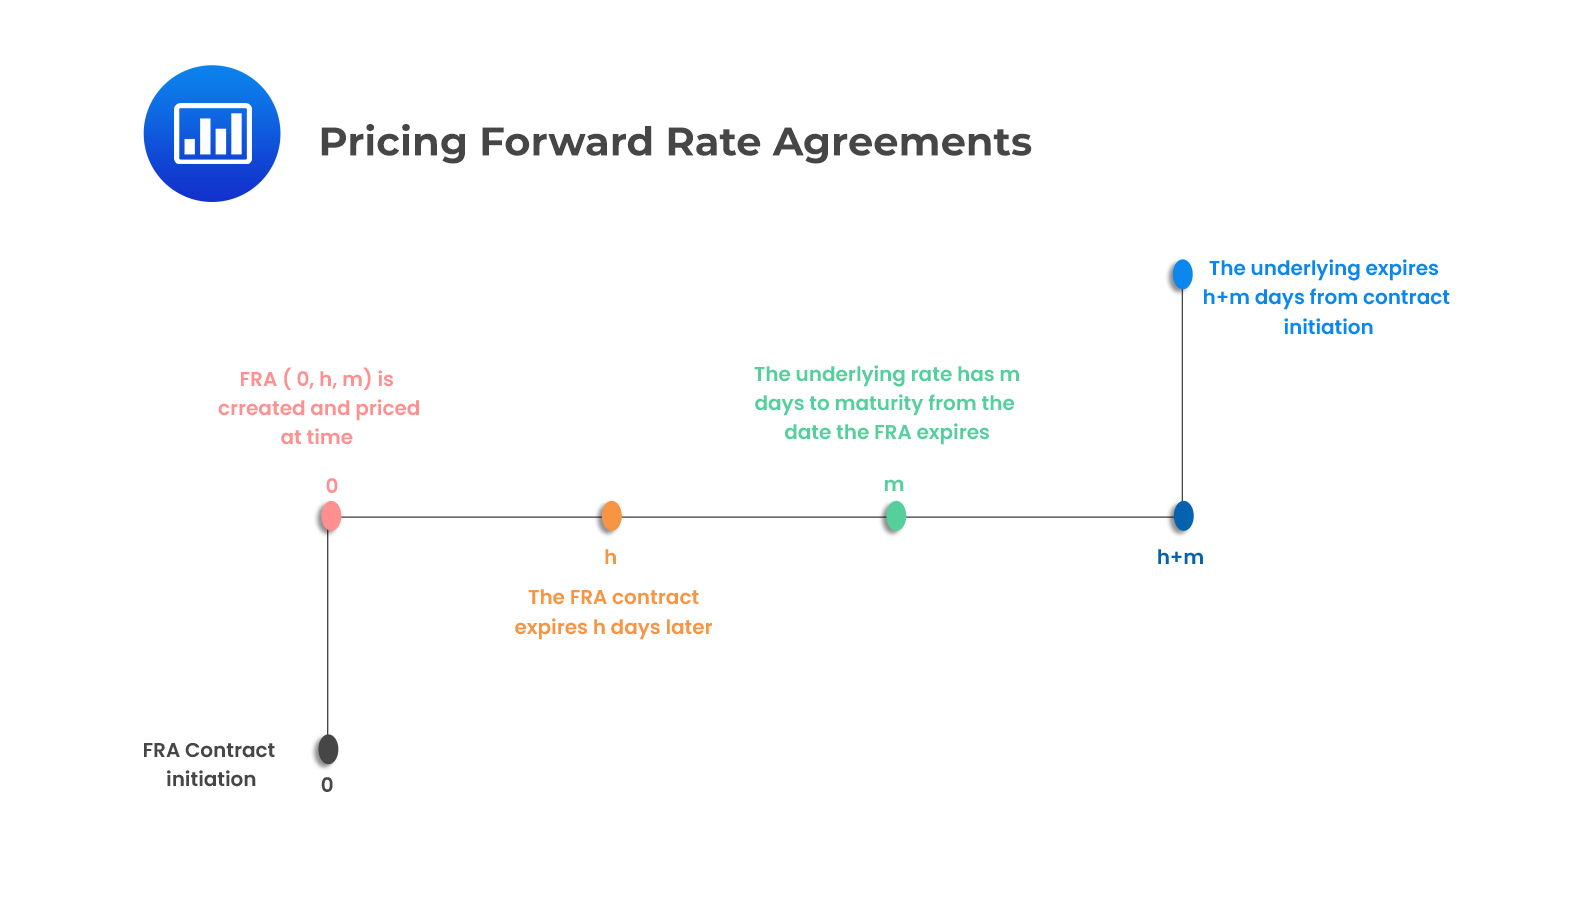 Pricing Forward Rate Agreements